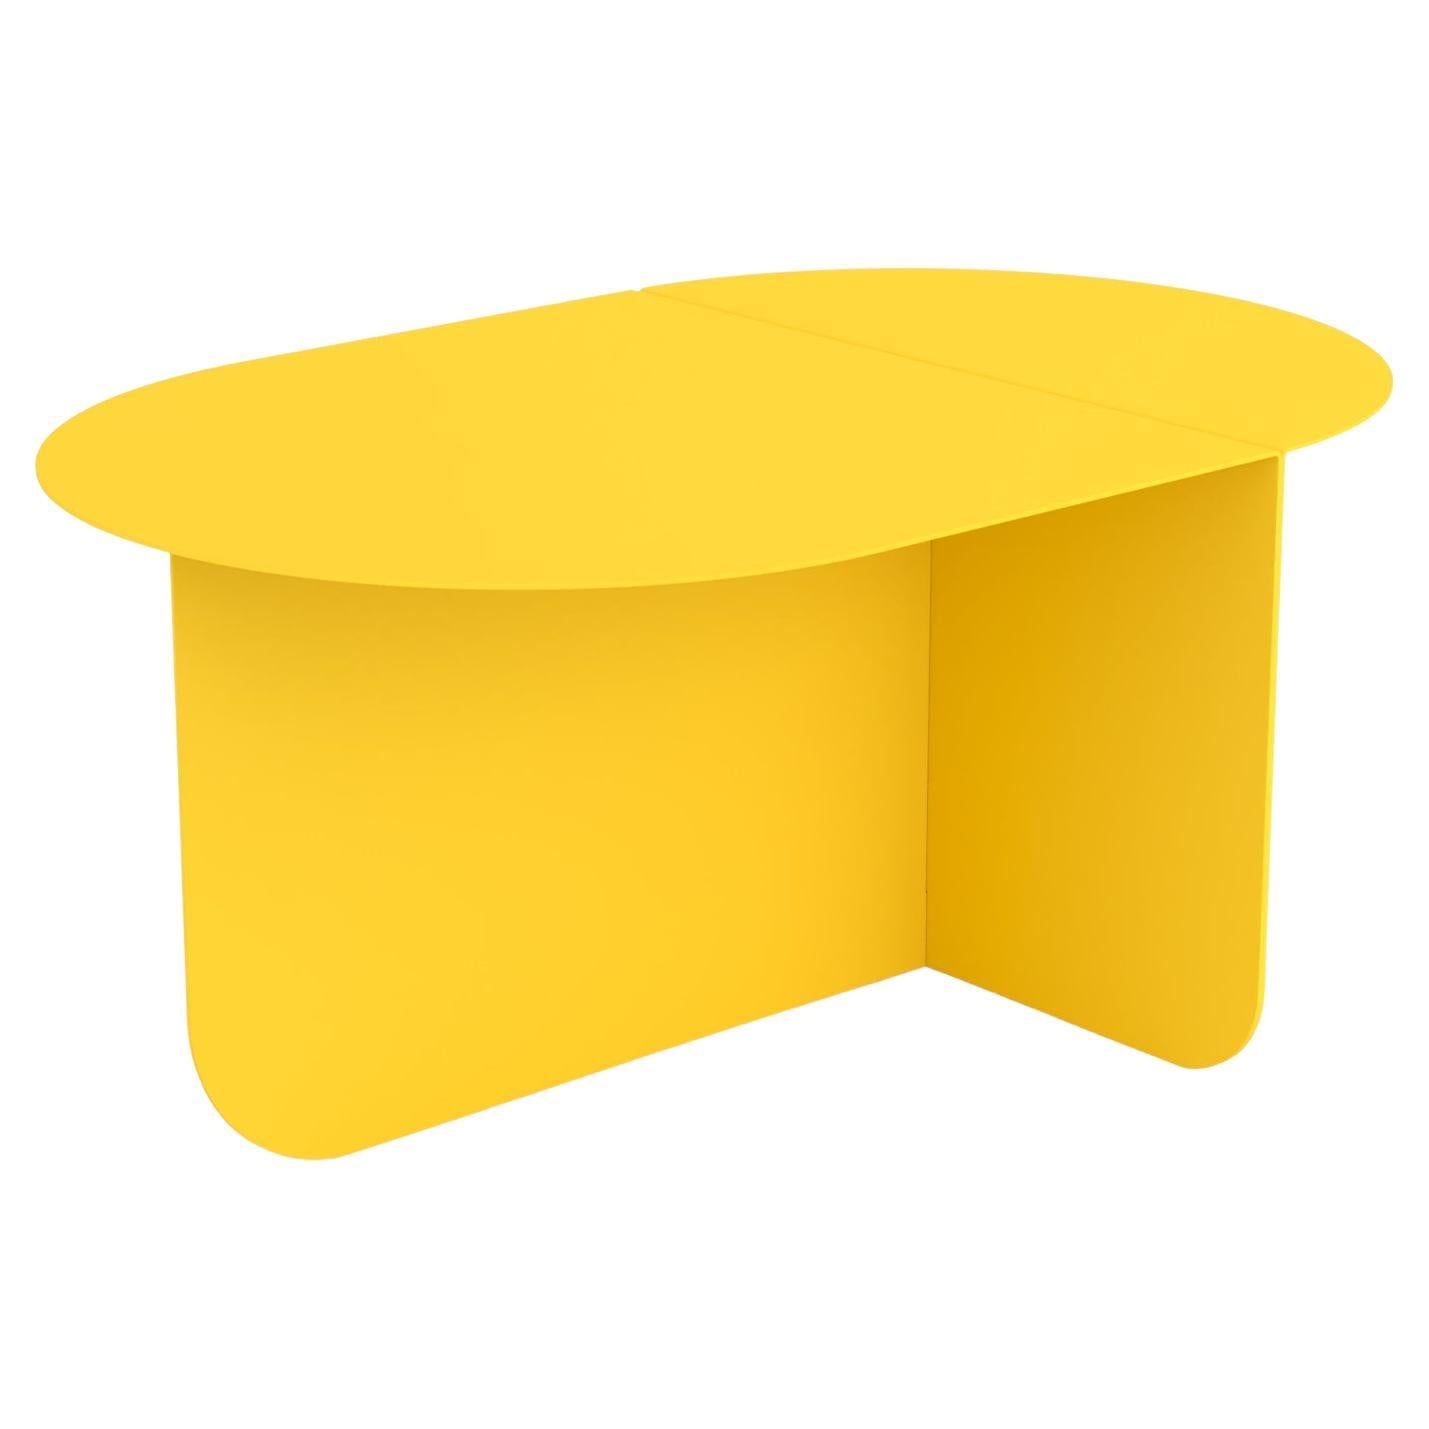 Colour, a Modern Oval Coffee Table, Ral 1018 - Zinc Yellow, by Bas Vellekoop For Sale